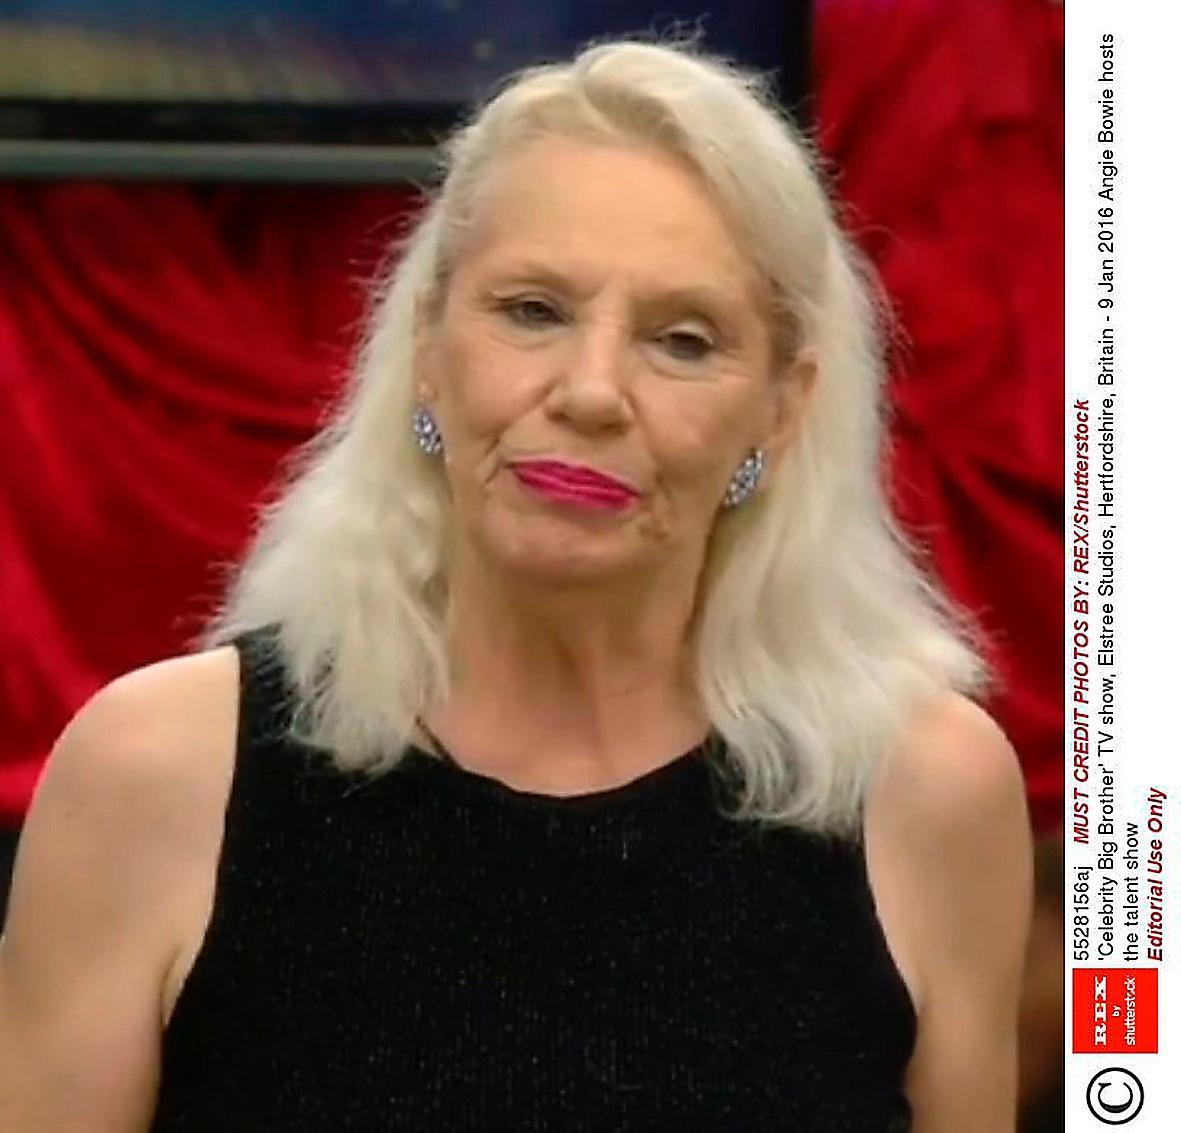 Angie Bowie instängd i ”Big brother”-huset.